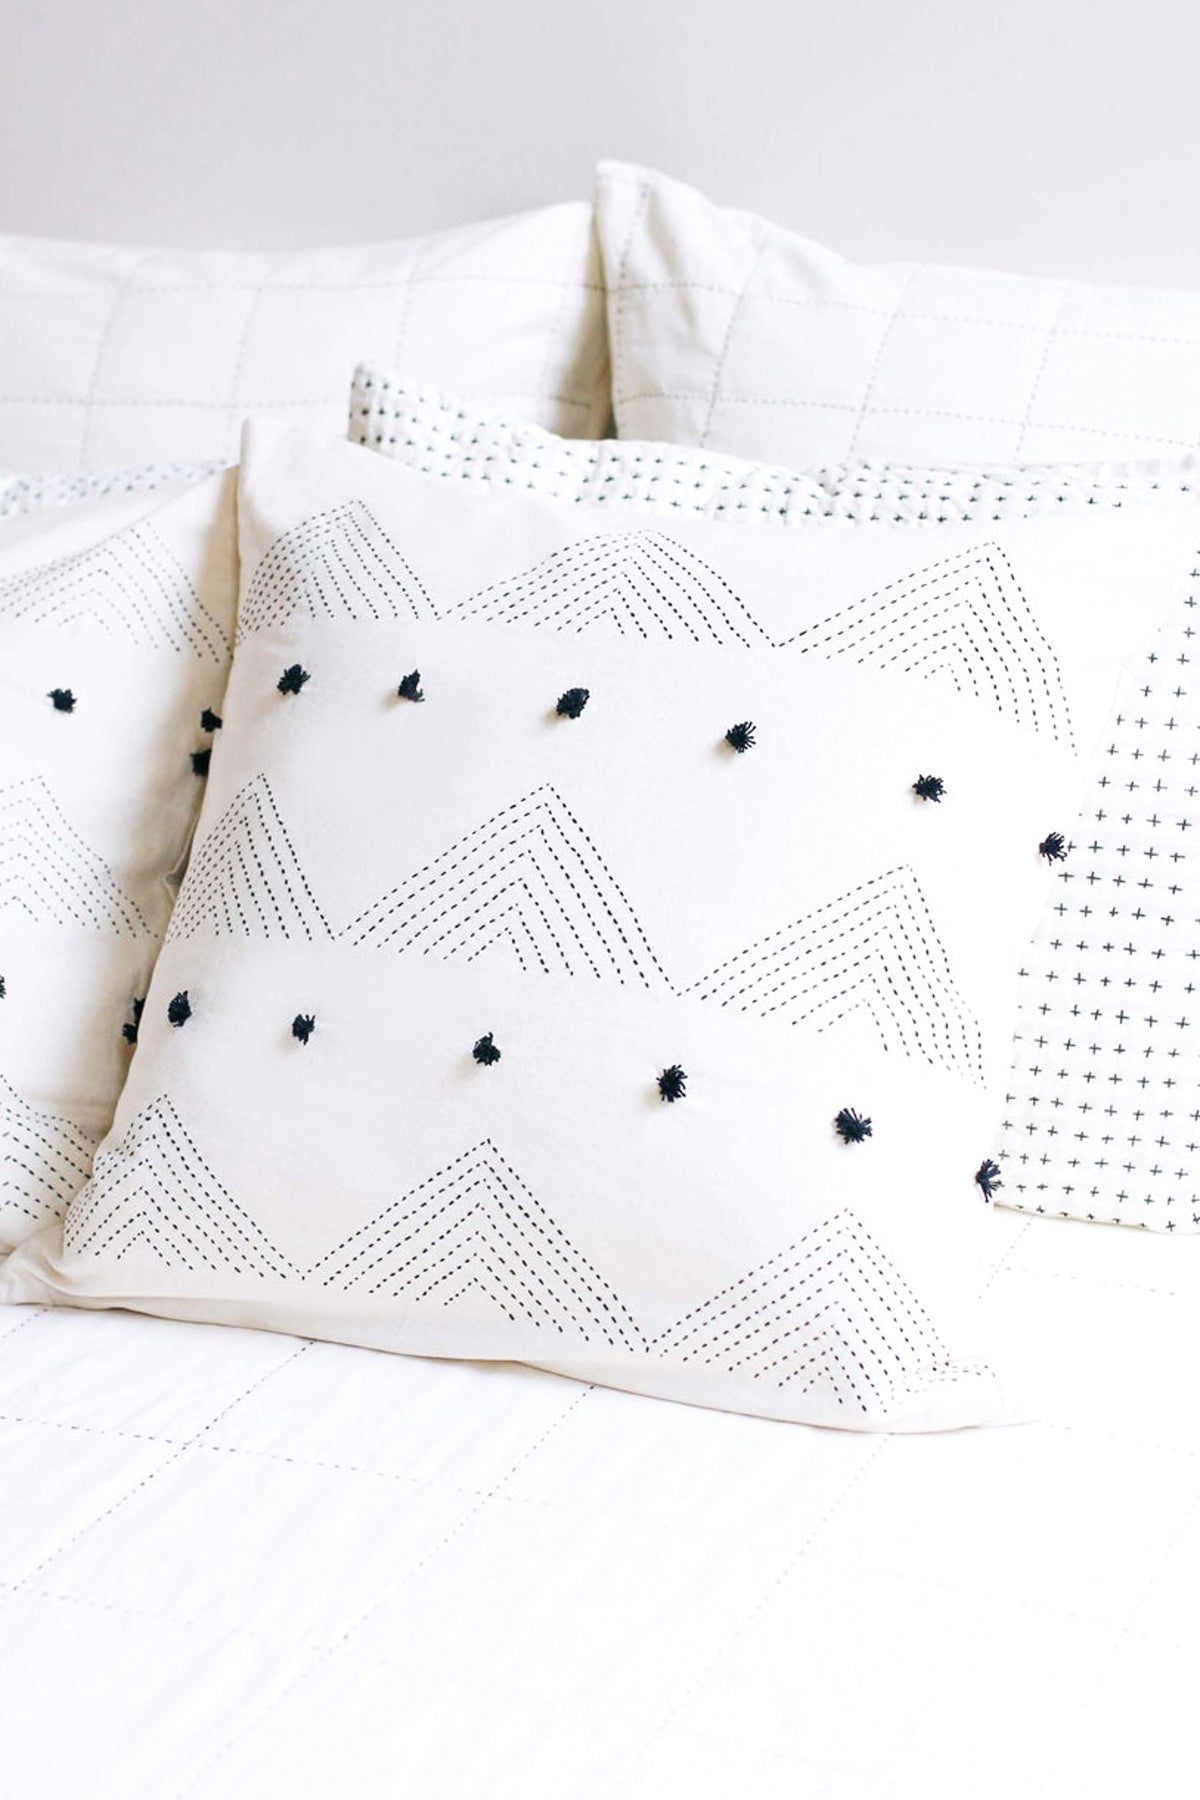 Anchal Project Triangle Stitch Throw Pillow Cover - Bone